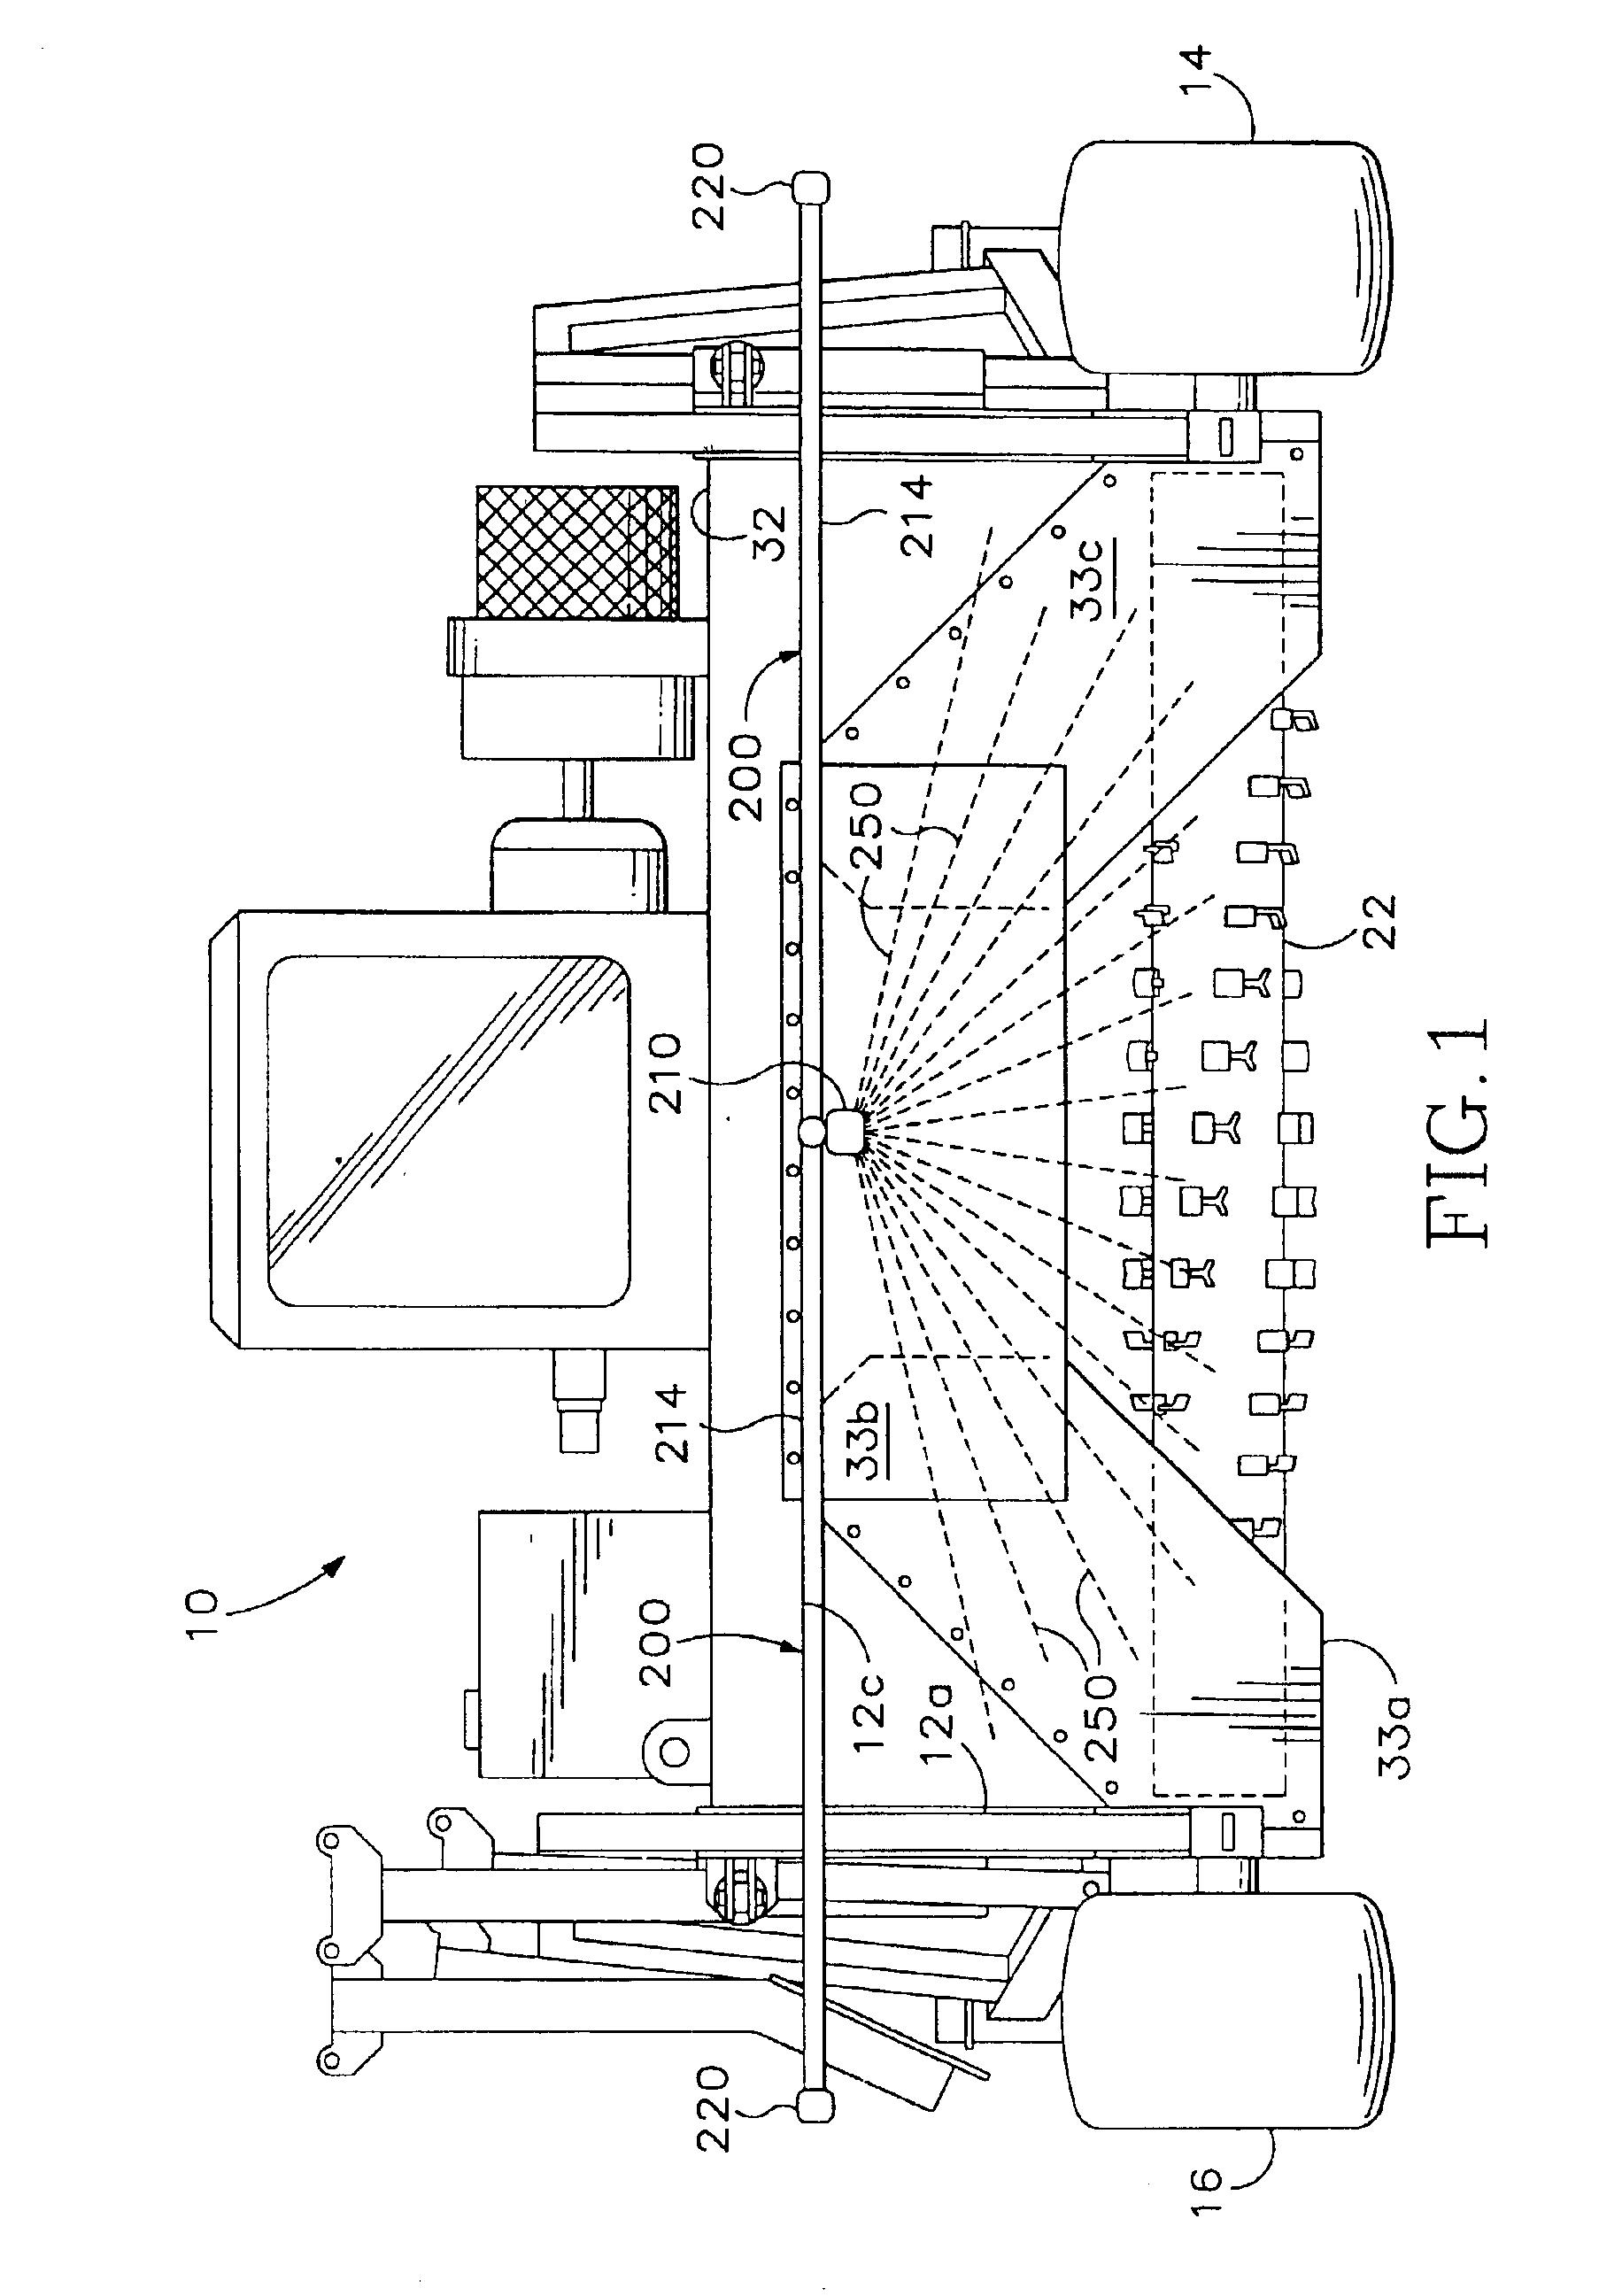 Method for producing drum and paddle assembly for accelerated remediation